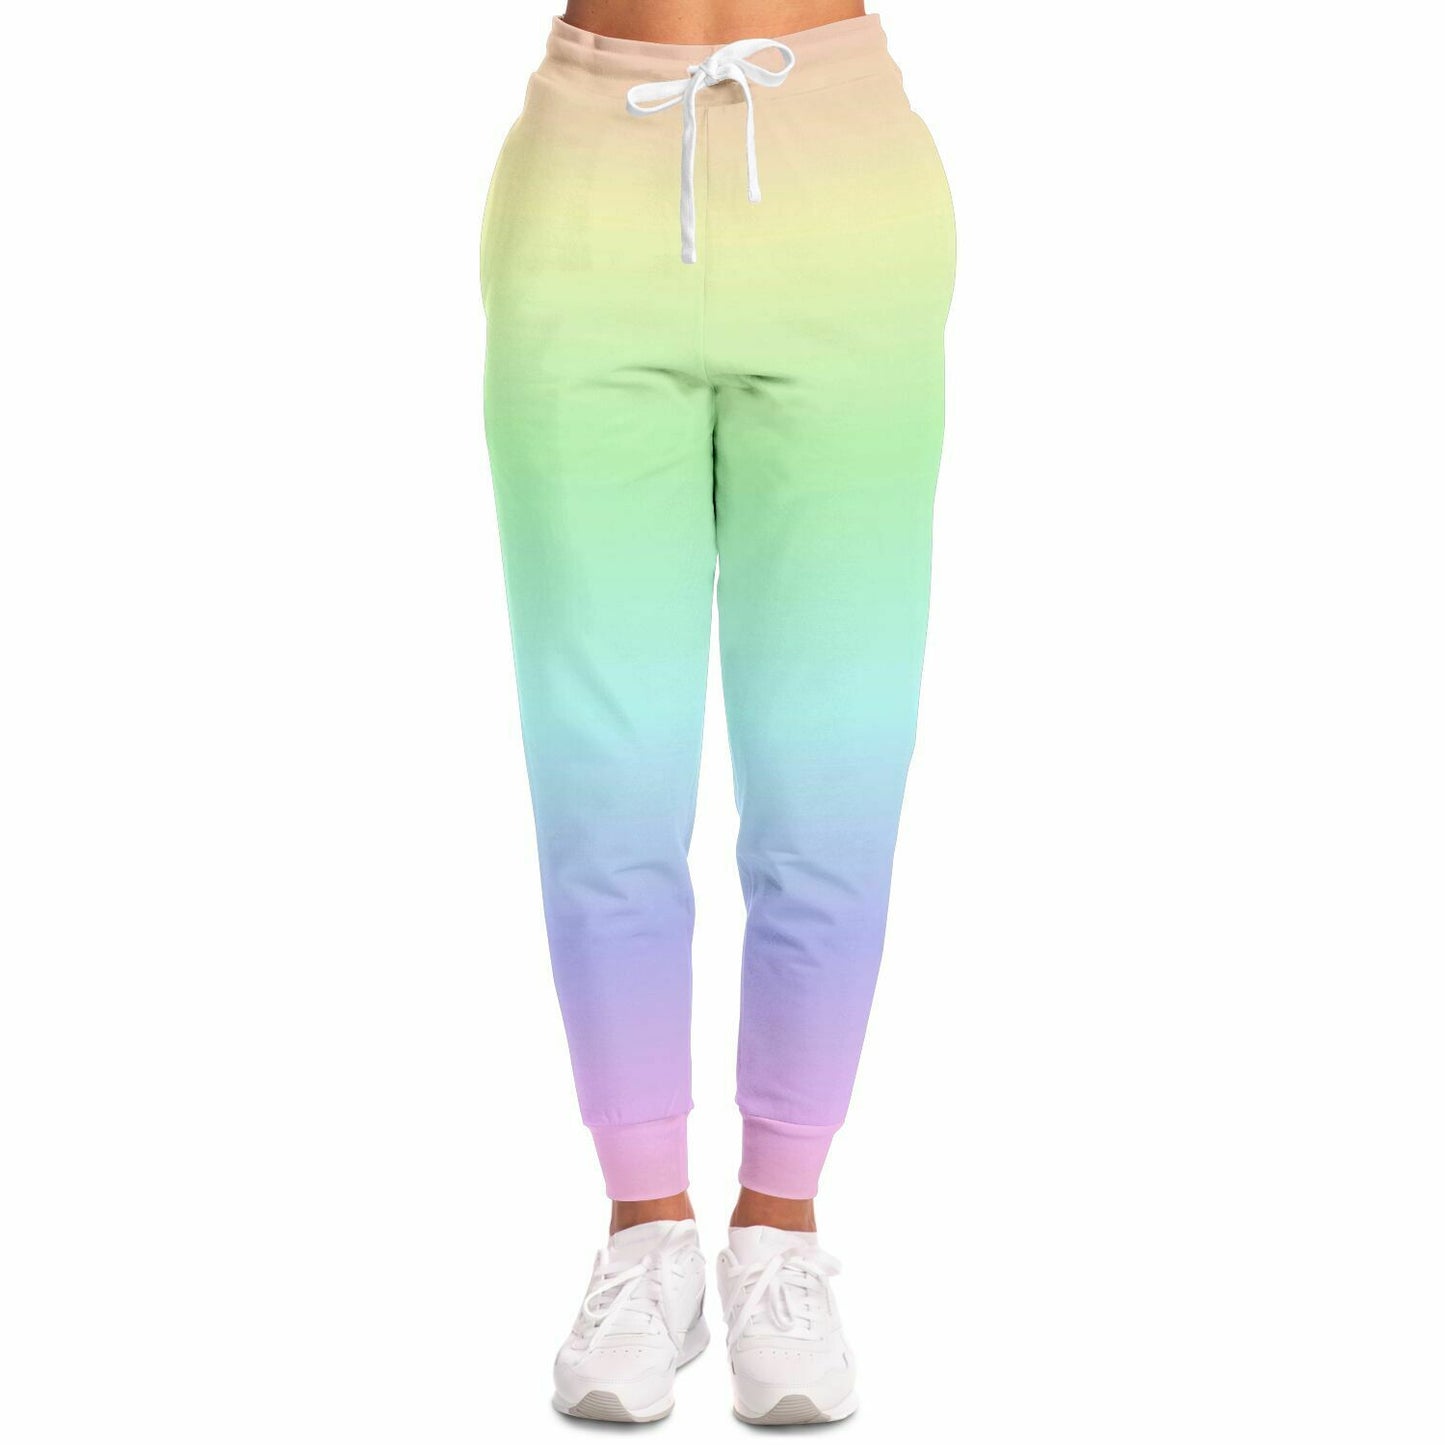 Tie Dye Colorful Rainbow Sweatpants for Women with Pockets Comfy